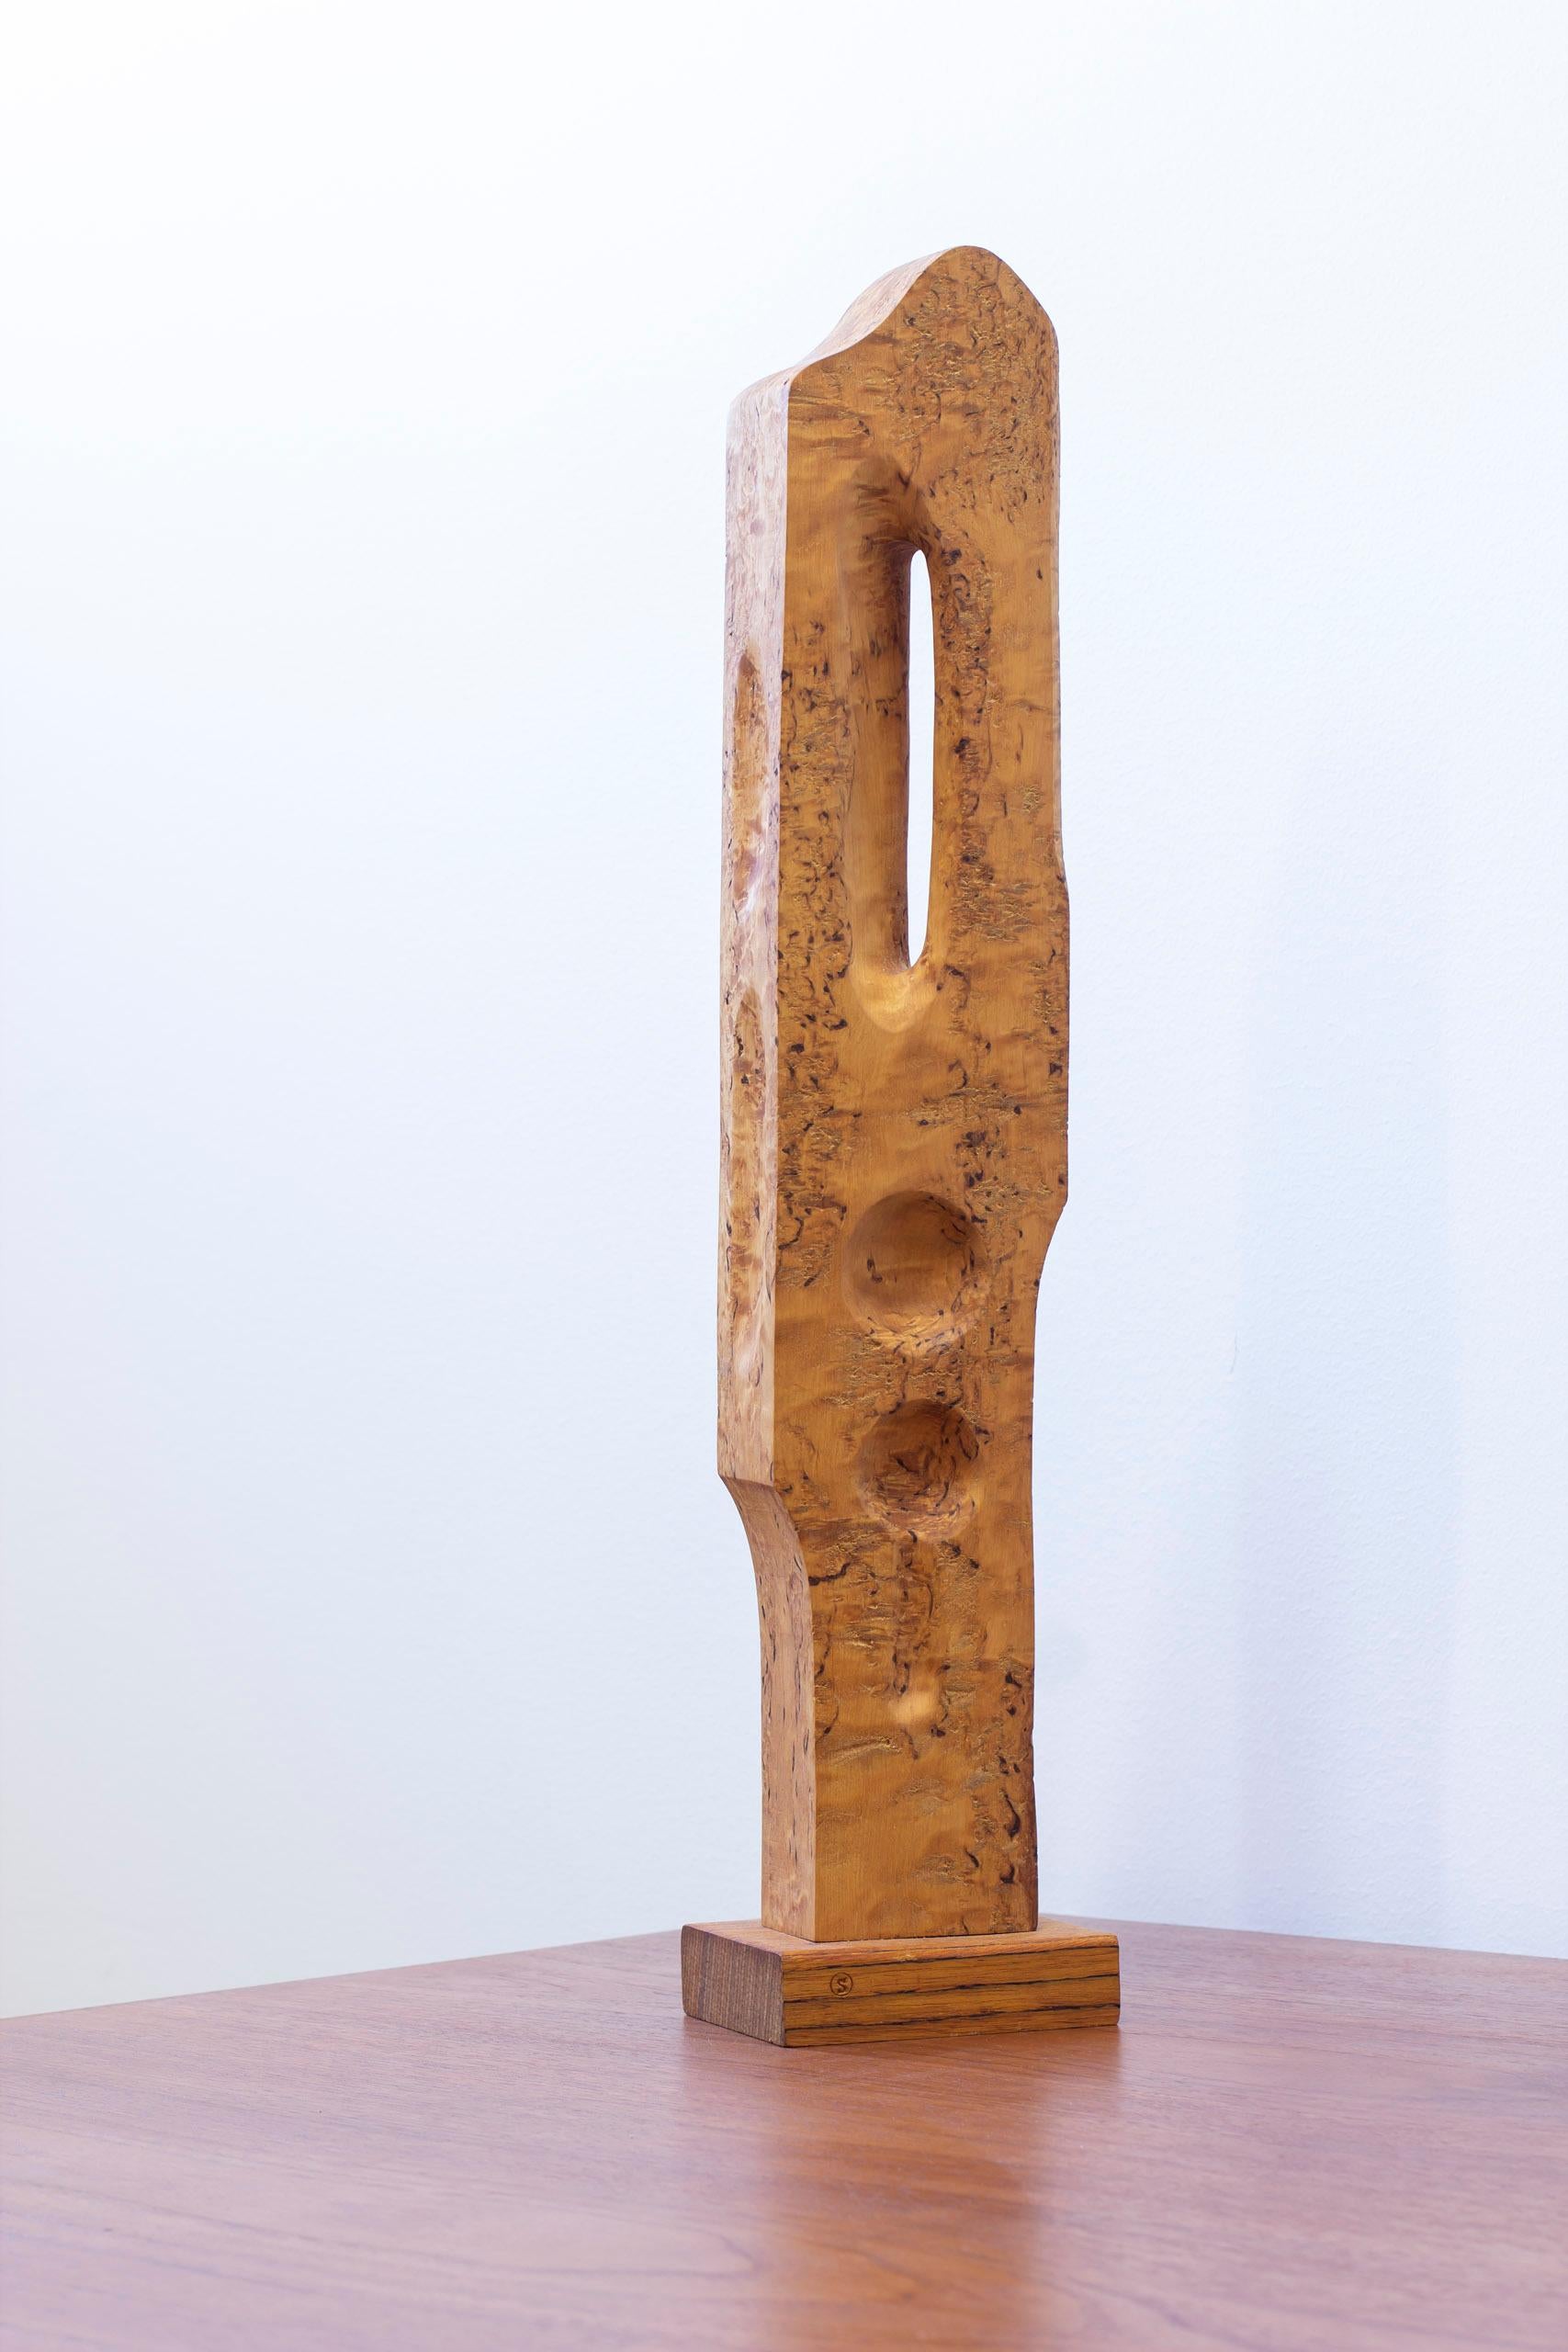 Abstract burl birch sculpture by Sven Olsson For Sale 2